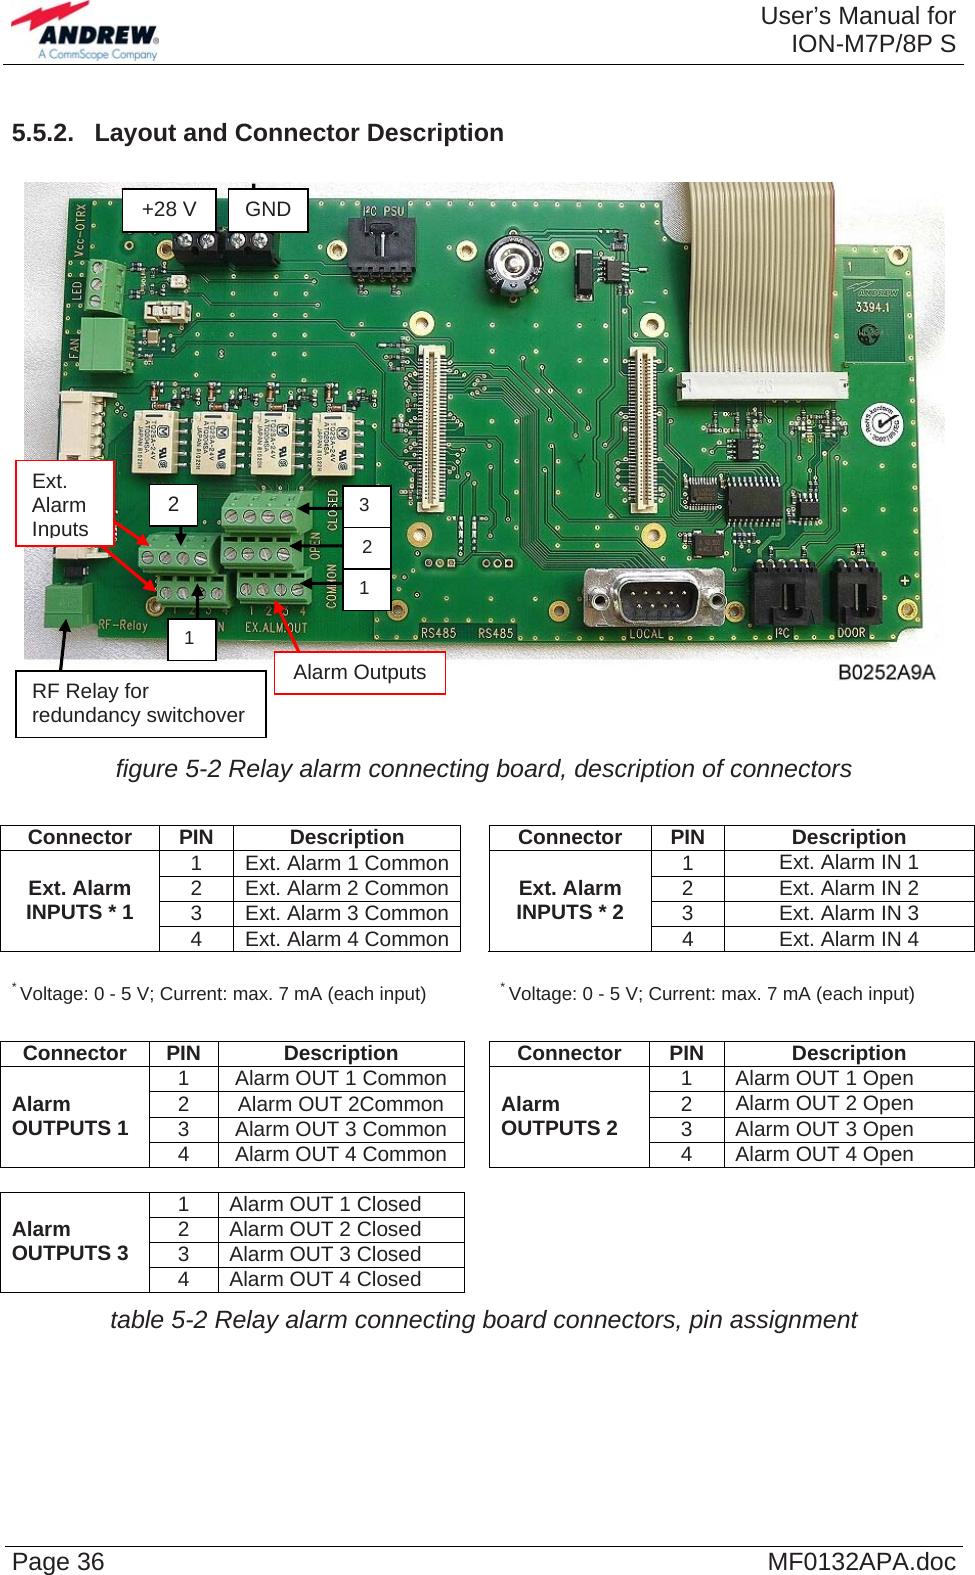  User’s Manual forION-M7P/8P S Page 36  MF0132APA.doc5.5.2.  Layout and Connector Description   GND +28 V    figure 5-2 Relay alarm connecting board, description of connectors   Connector PIN  Description  Connector PIN  Description 1  Ext. Alarm 1 Common 1  Ext. Alarm IN 1 2  Ext. Alarm 2 Common 2  Ext. Alarm IN 2 3  Ext. Alarm 3 Common 3  Ext. Alarm IN 3 Ext. Alarm INPUTS * 1 4  Ext. Alarm 4 CommonExt. Alarm INPUTS * 2 4  Ext. Alarm IN 4   * Voltage: 0 - 5 V; Current: max. 7 mA (each input)  * Voltage: 0 - 5 V; Current: max. 7 mA (each input)  Connector PIN  Description  Connector PIN  Description 1  Alarm OUT 1 Common  1  Alarm OUT 1 Open 2  Alarm OUT 2Common  2  Alarm OUT 2 Open 3  Alarm OUT 3 Common  3  Alarm OUT 3 Open Alarm OUTPUTS 1 4  Alarm OUT 4 Common Alarm OUTPUTS 2 4  Alarm OUT 4 Open   1  Alarm OUT 1 Closed 2  Alarm OUT 2 Closed 3  Alarm OUT 3 Closed Alarm OUTPUTS 3 4  Alarm OUT 4 Closed   table 5-2 Relay alarm connecting board connectors, pin assignment Ext.  Alarm Outputs RF Relay for  redundancy switchover 1 2 3 2 Alarm  Inputs 1 